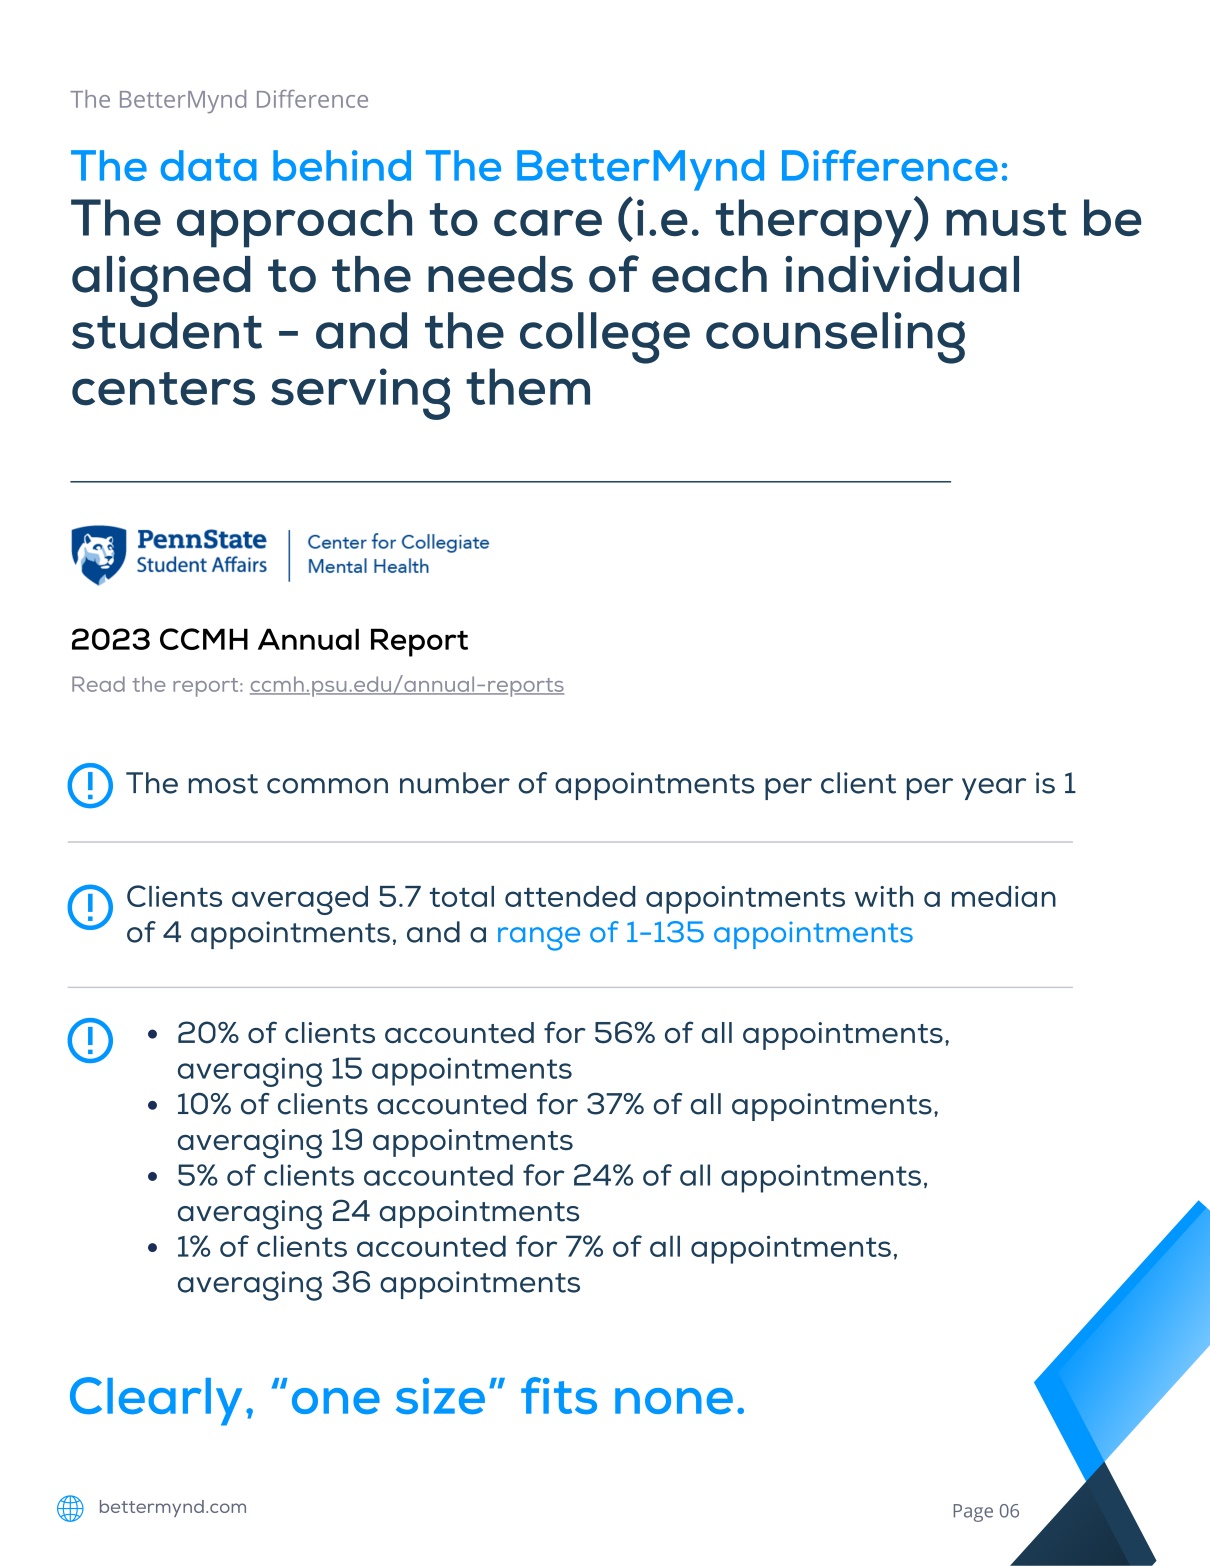 The approach to care (i.e. therapy) must be aligned to the needs of each individual student - and the college counseling centers serving them.